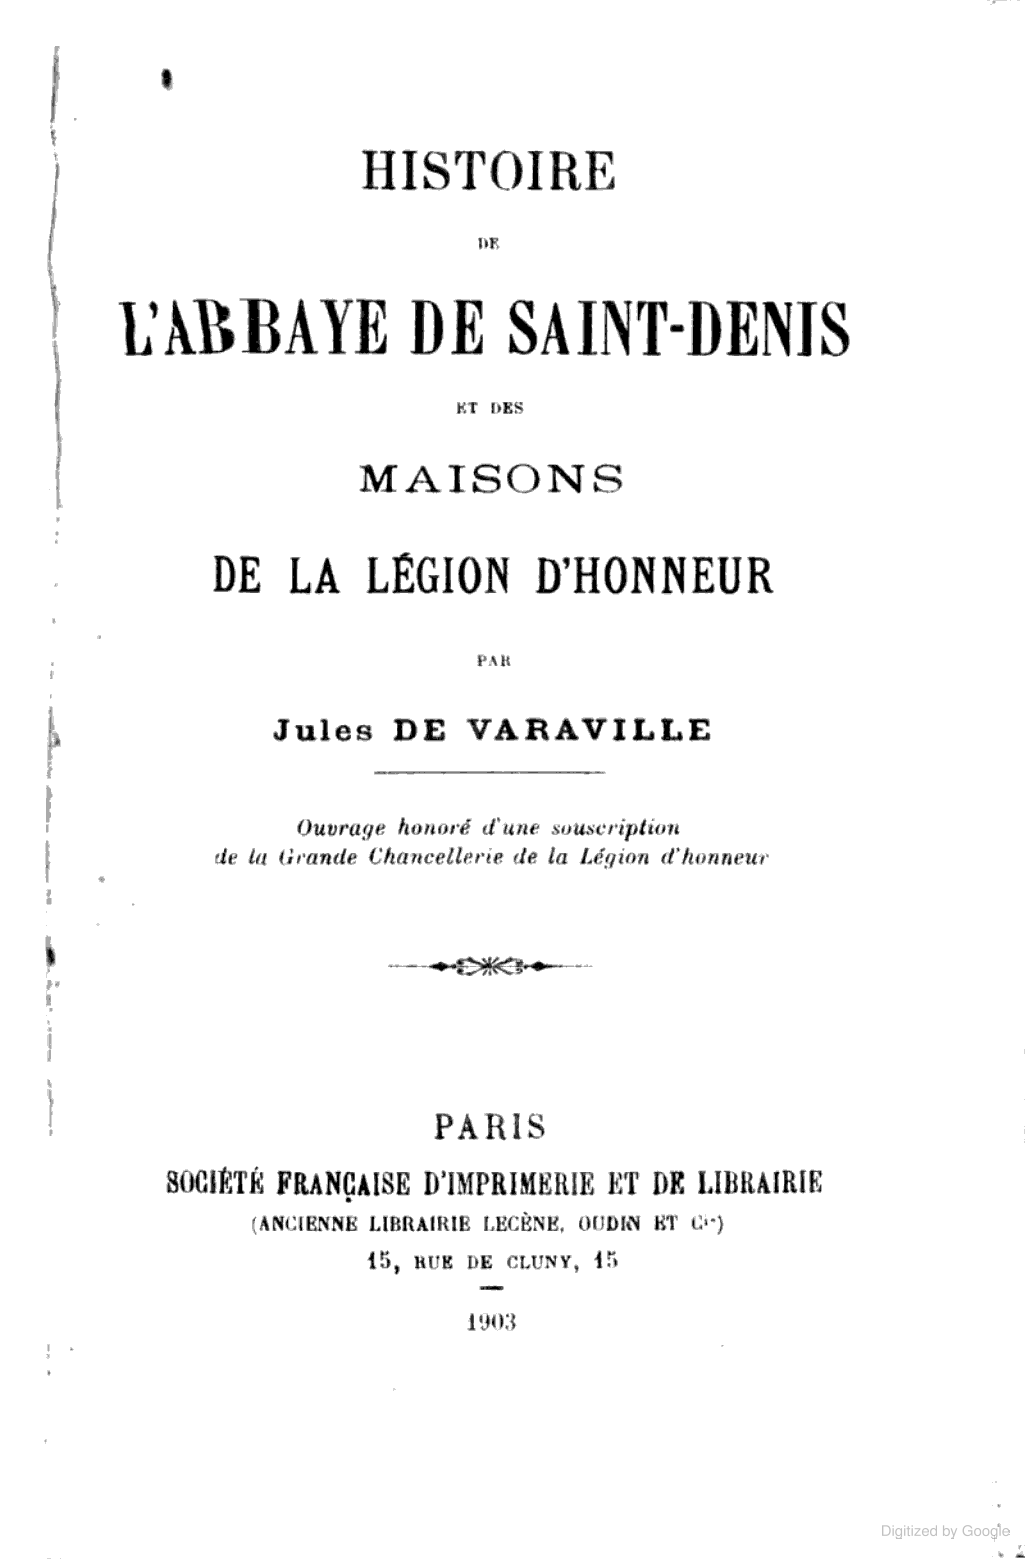 scan of title page of book